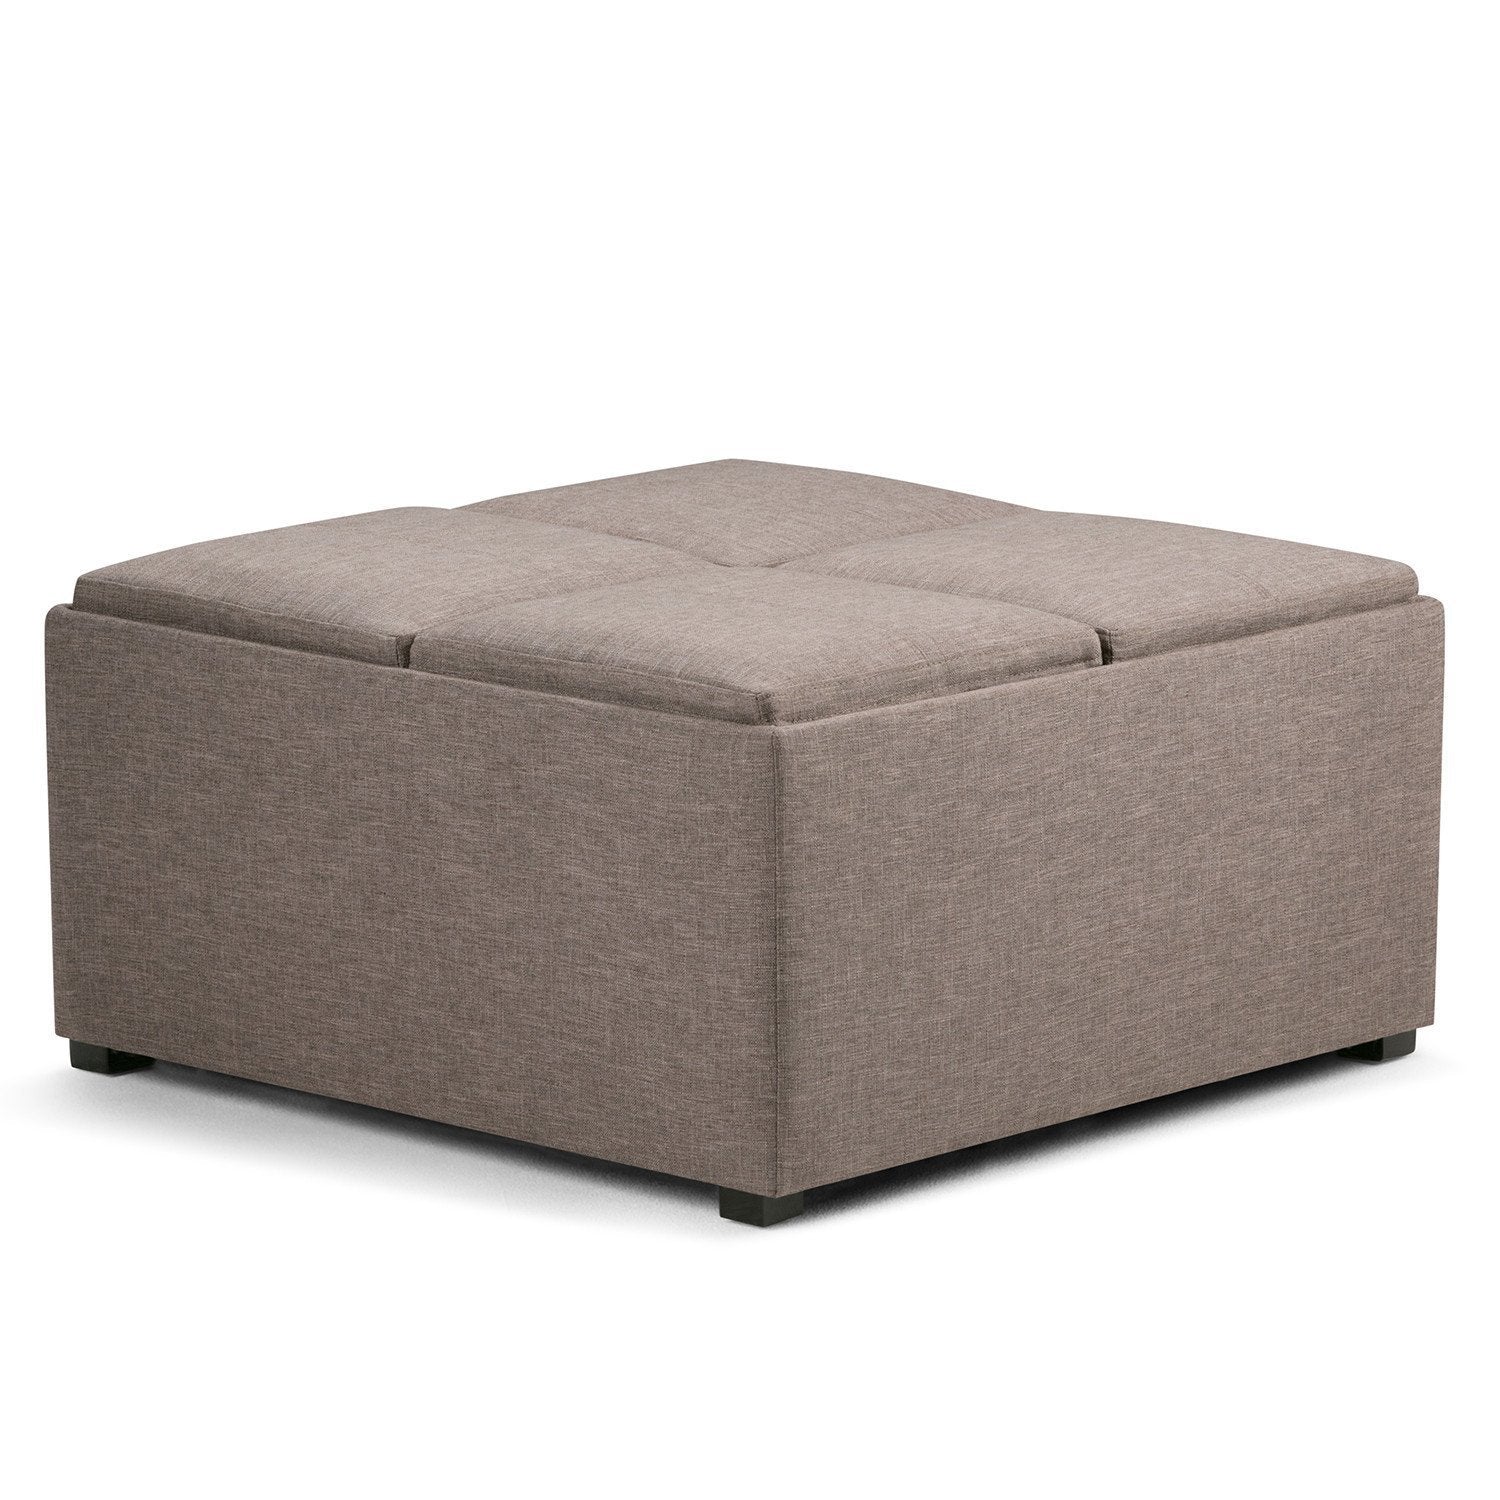 Fawn Brown Linen Style Fabric | Avalon Vegan Leather Square Coffee Table Storage Ottoman